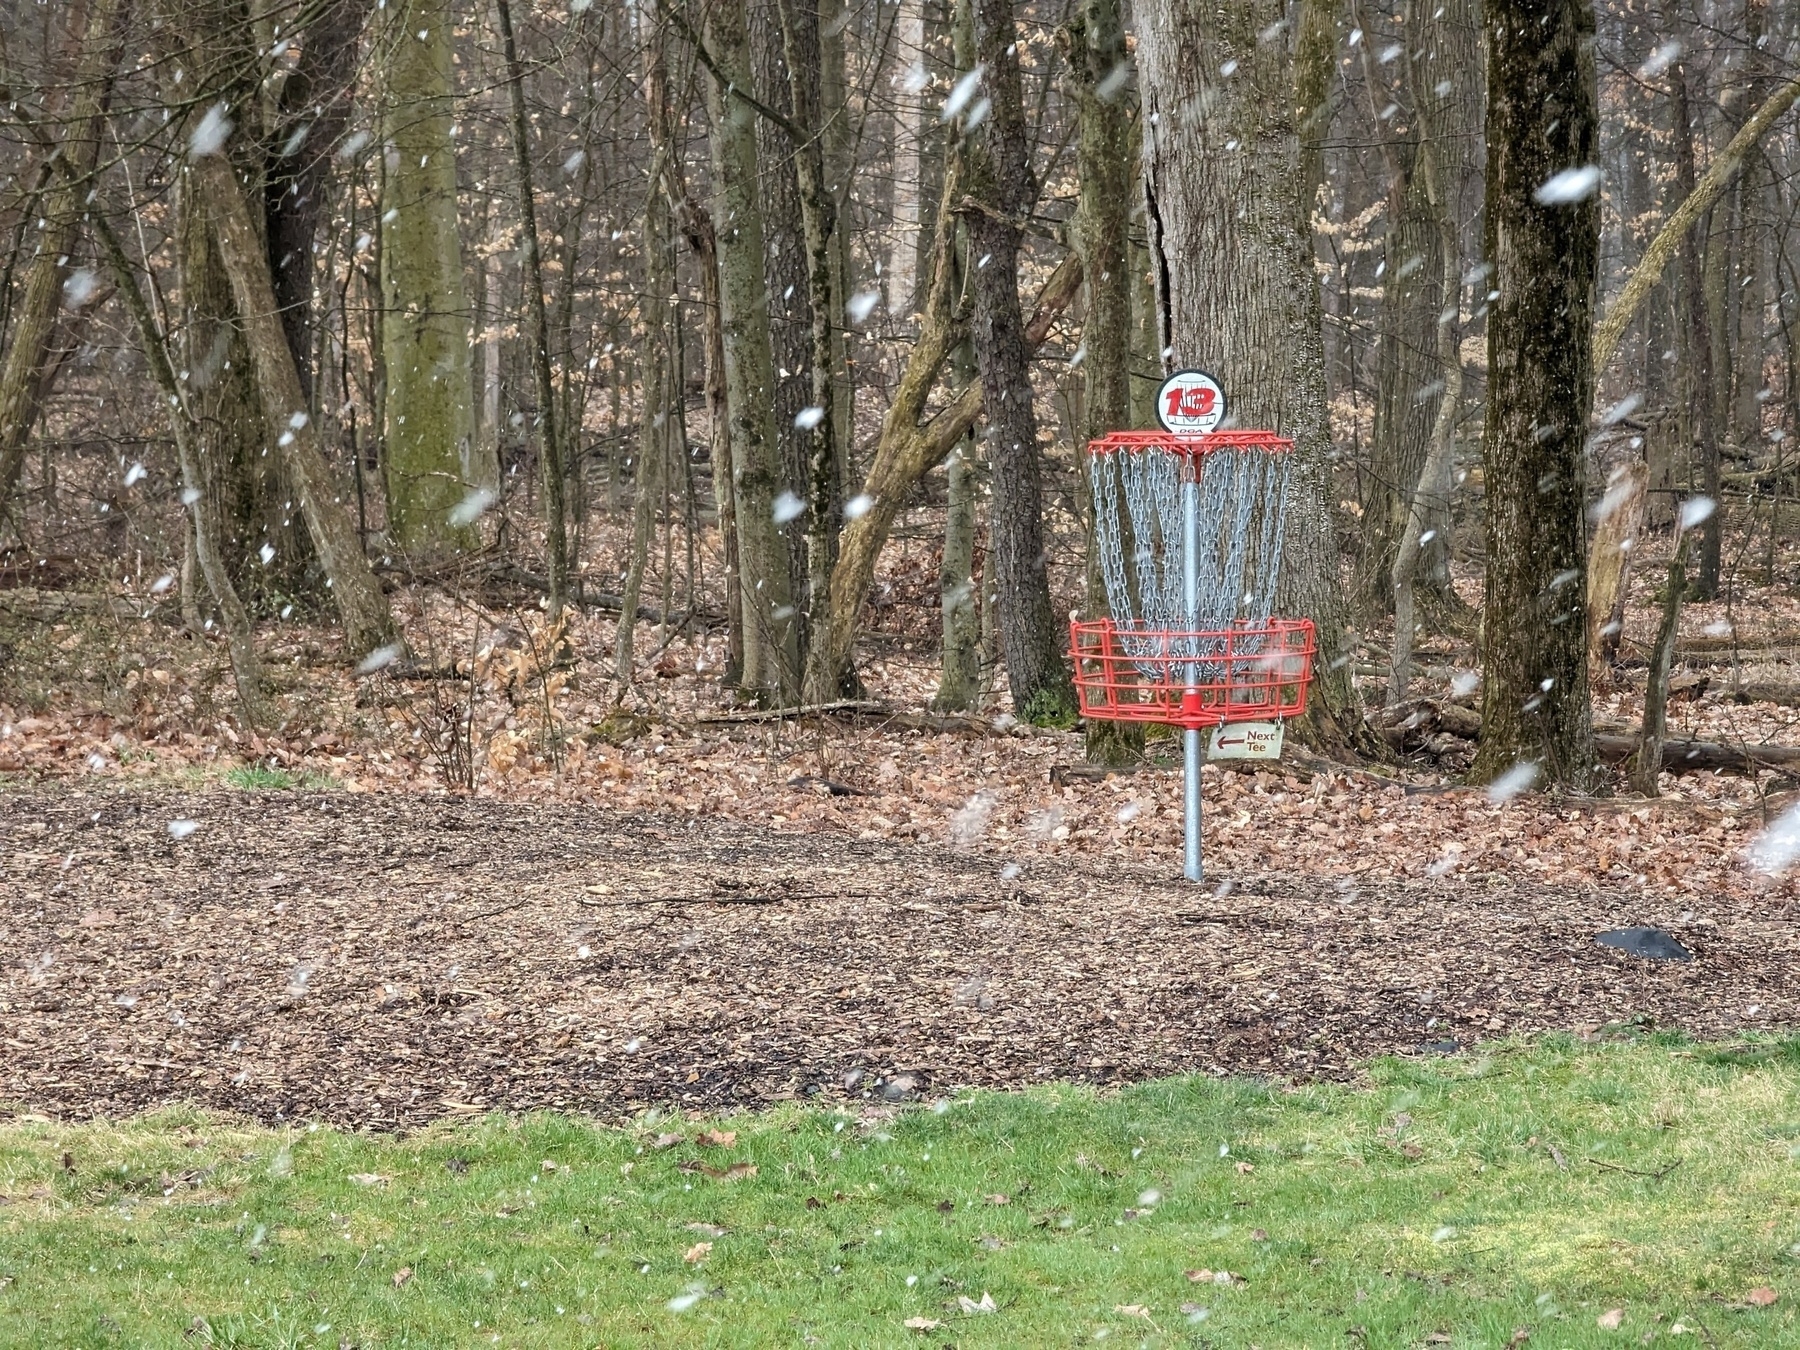 A red disc golf basket in front of trees with blurry snowflakes speeding through the frame.